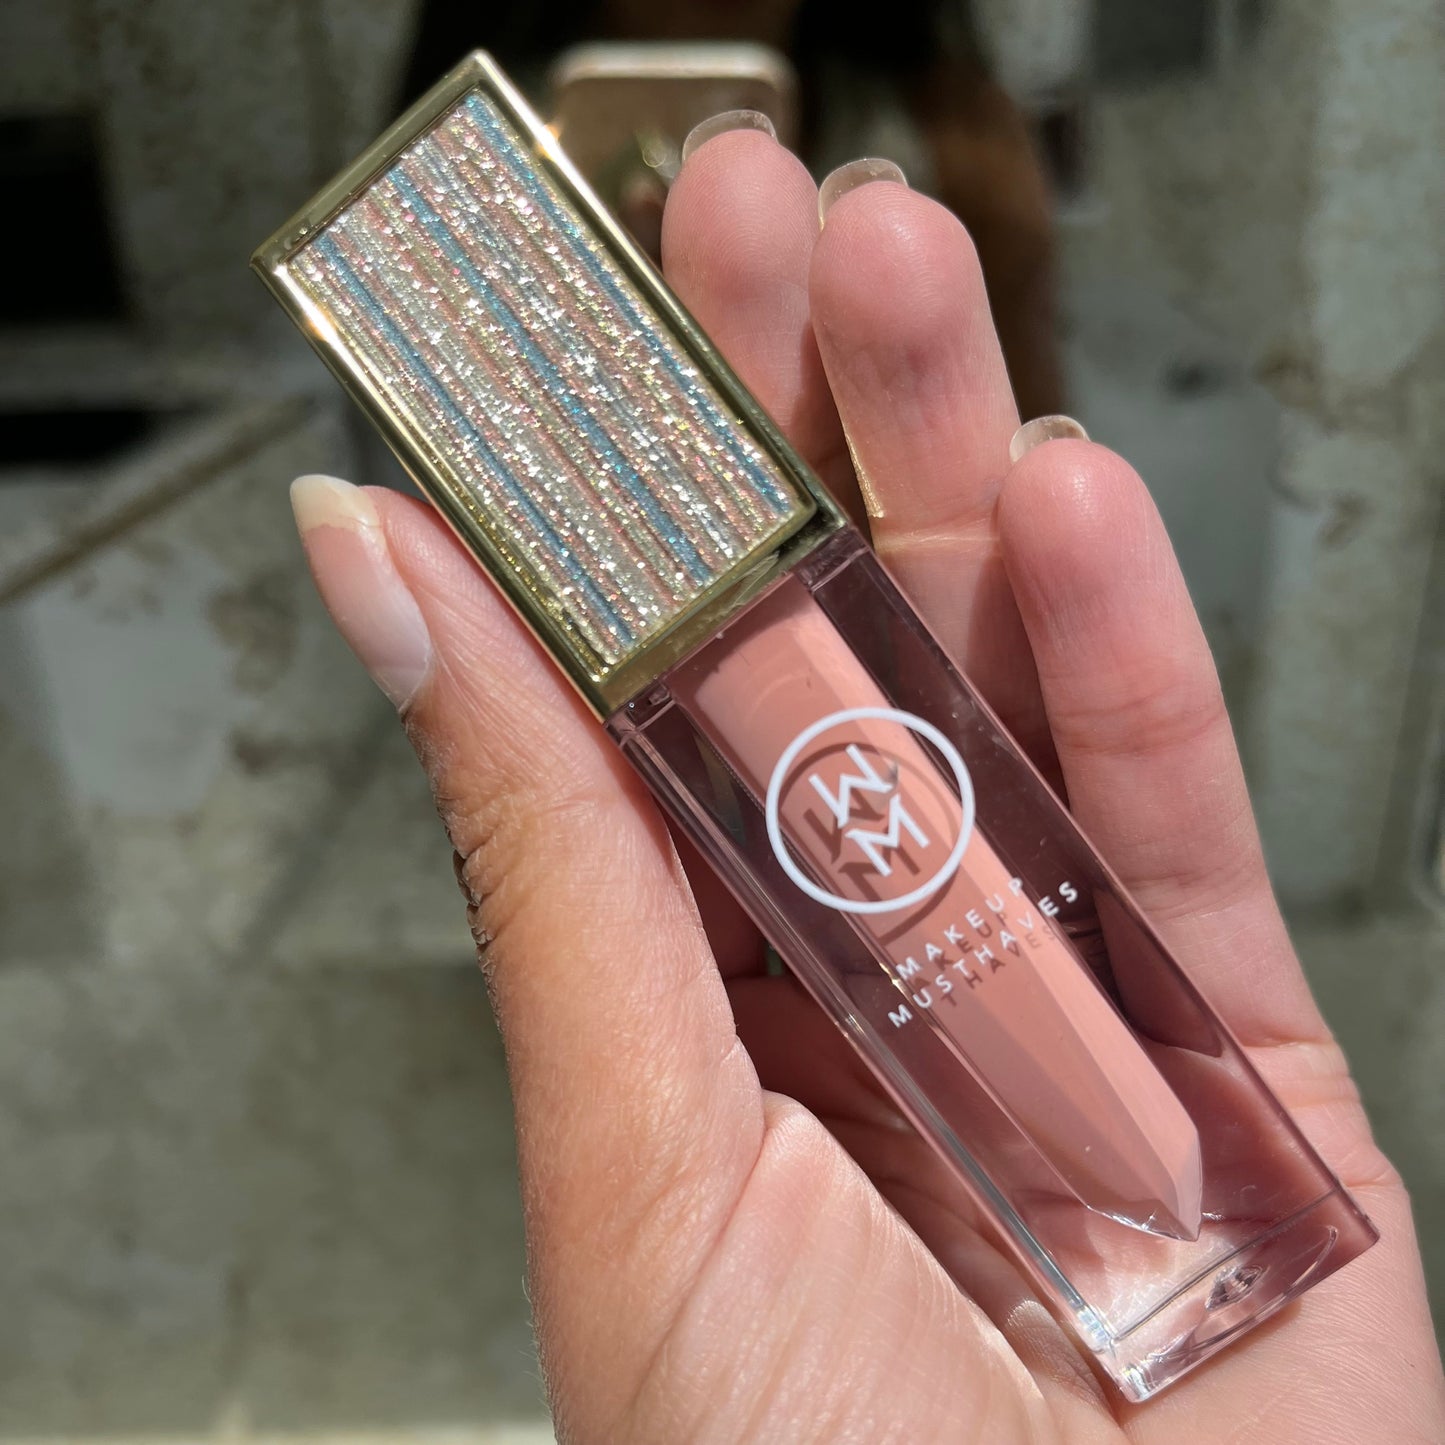 EASY LIPGLOSS NUDES